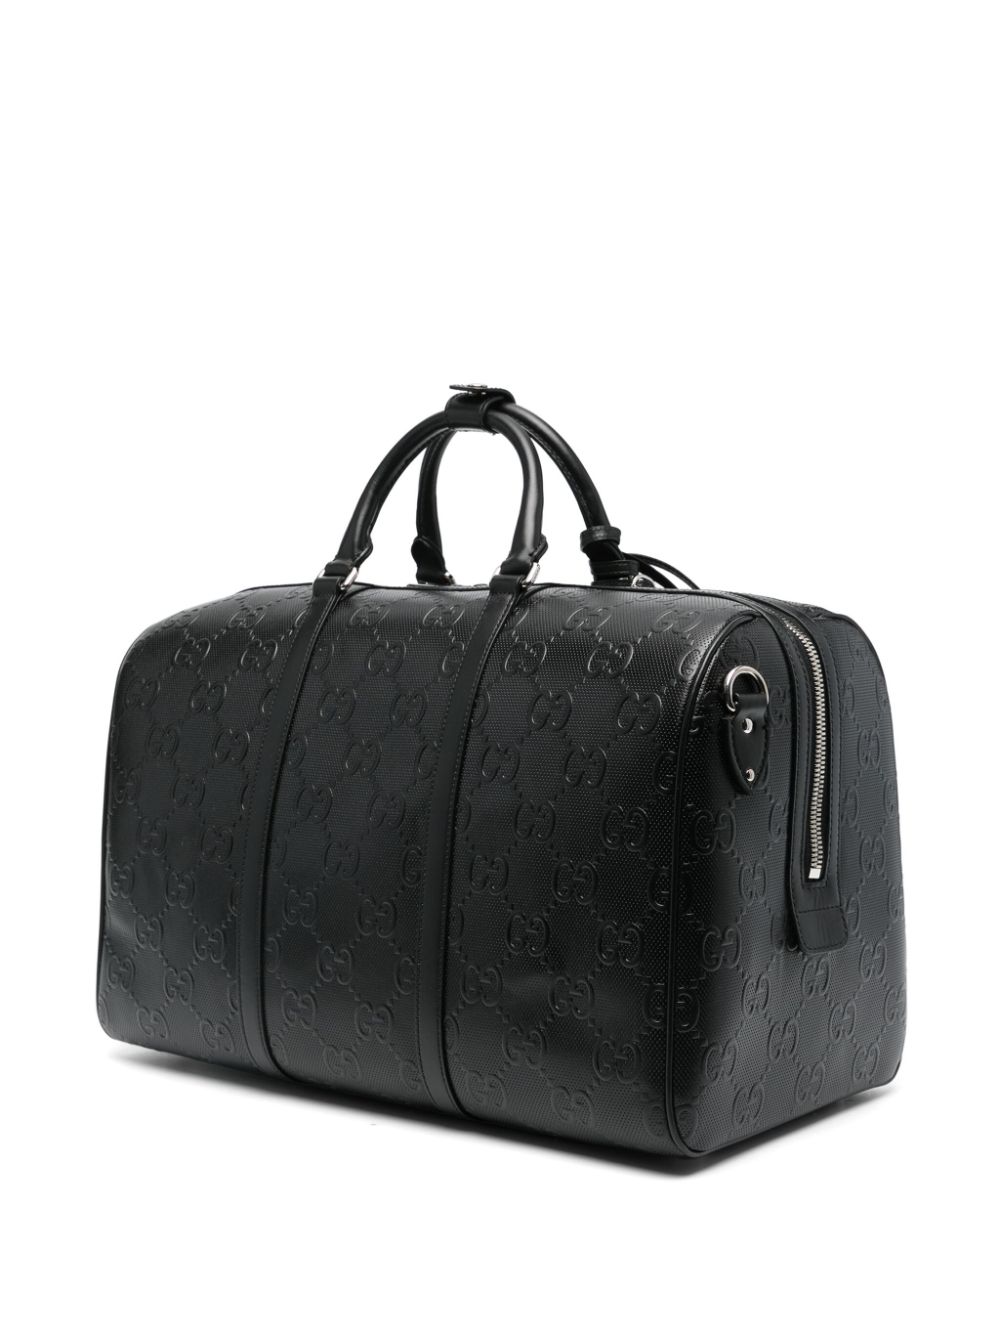 Image 2 of Gucci GG Supreme embossed holdall